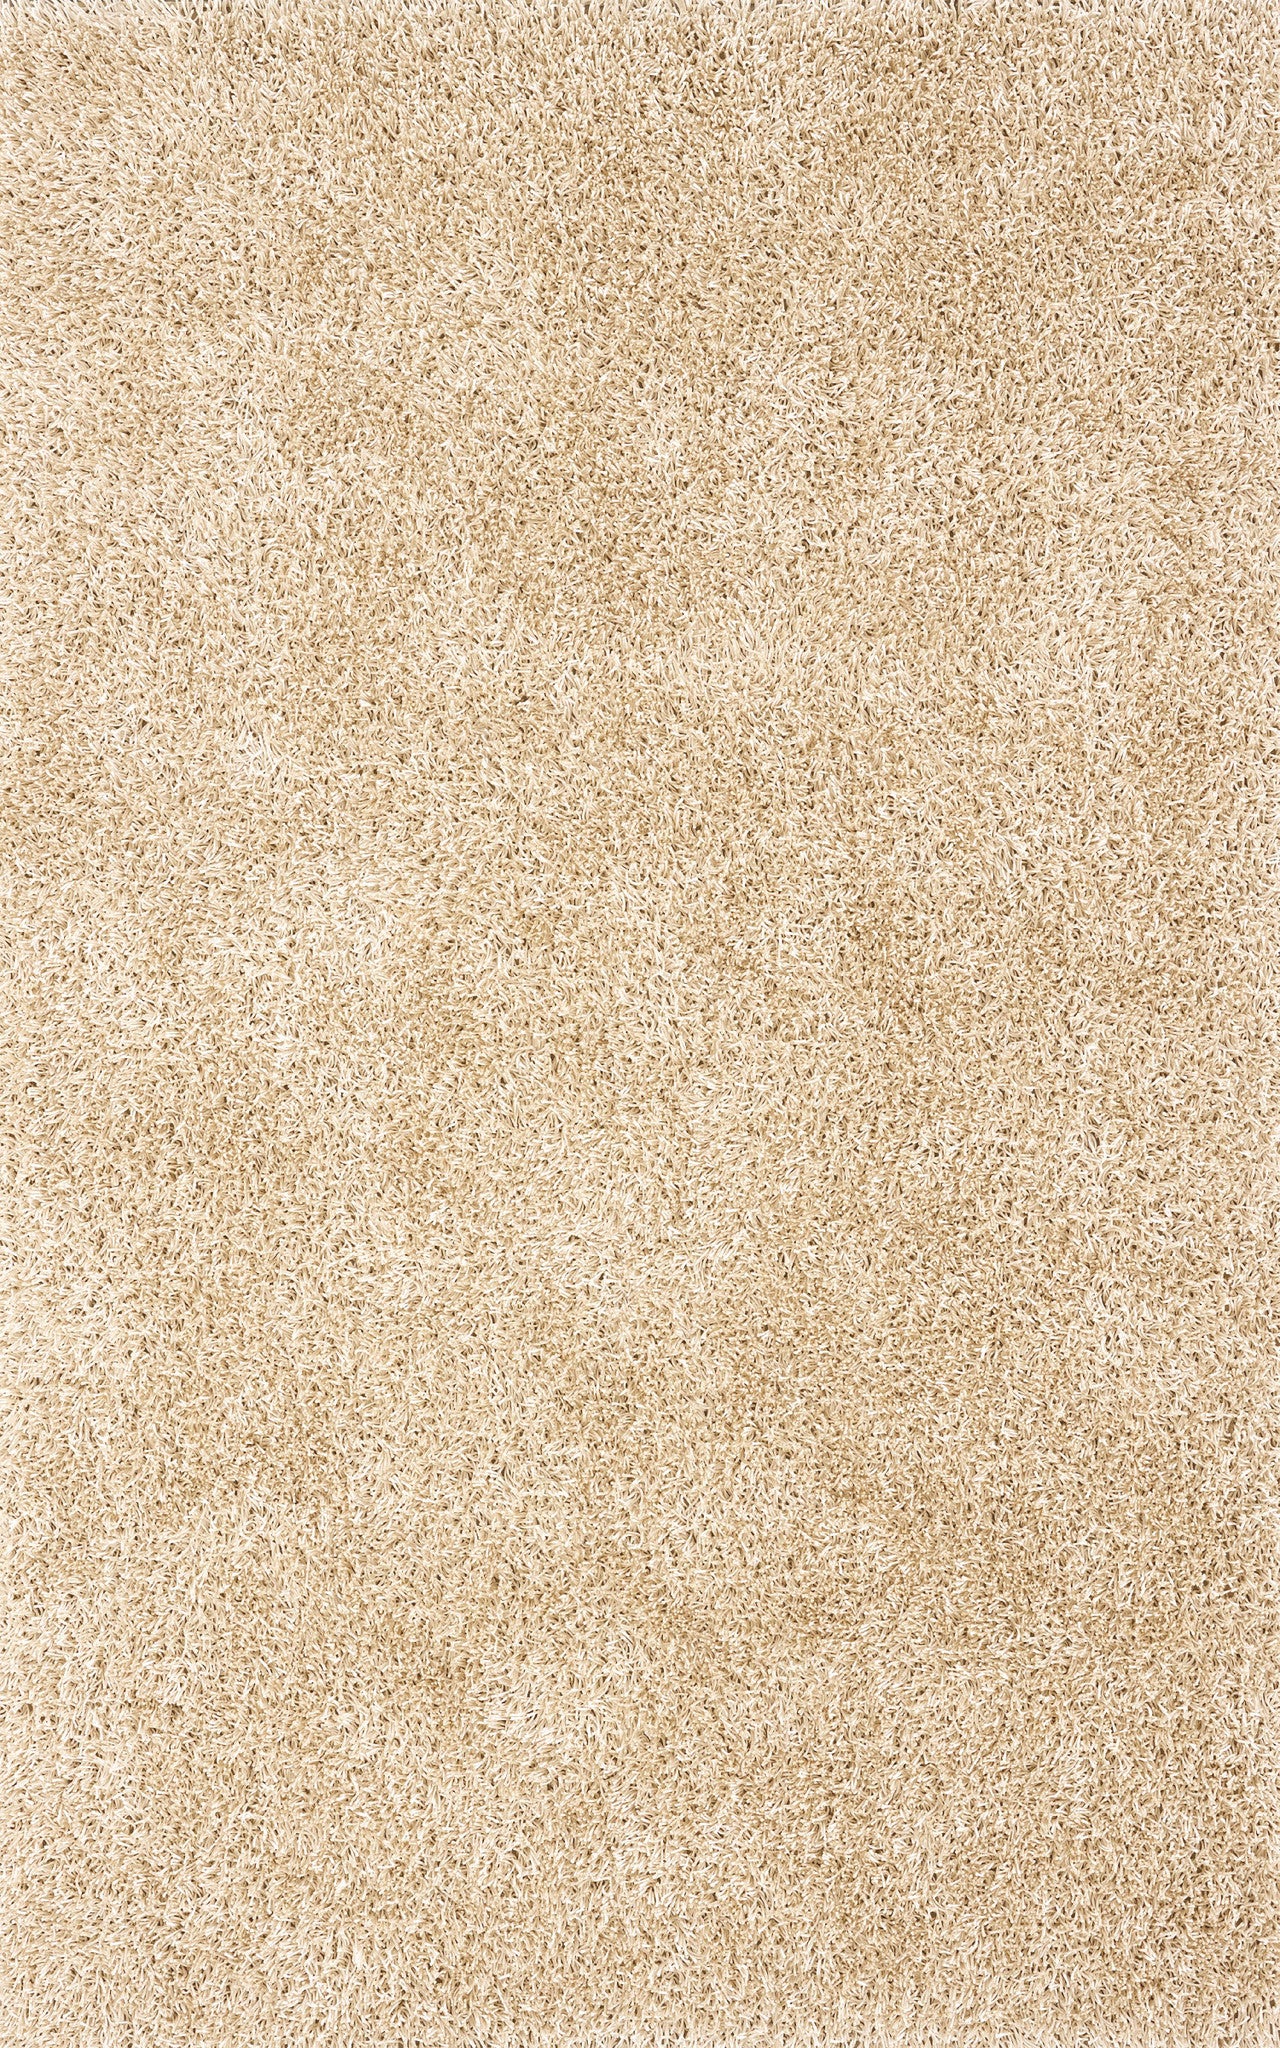 Dalyn Illusions IL69 Ivory Area Rug main image